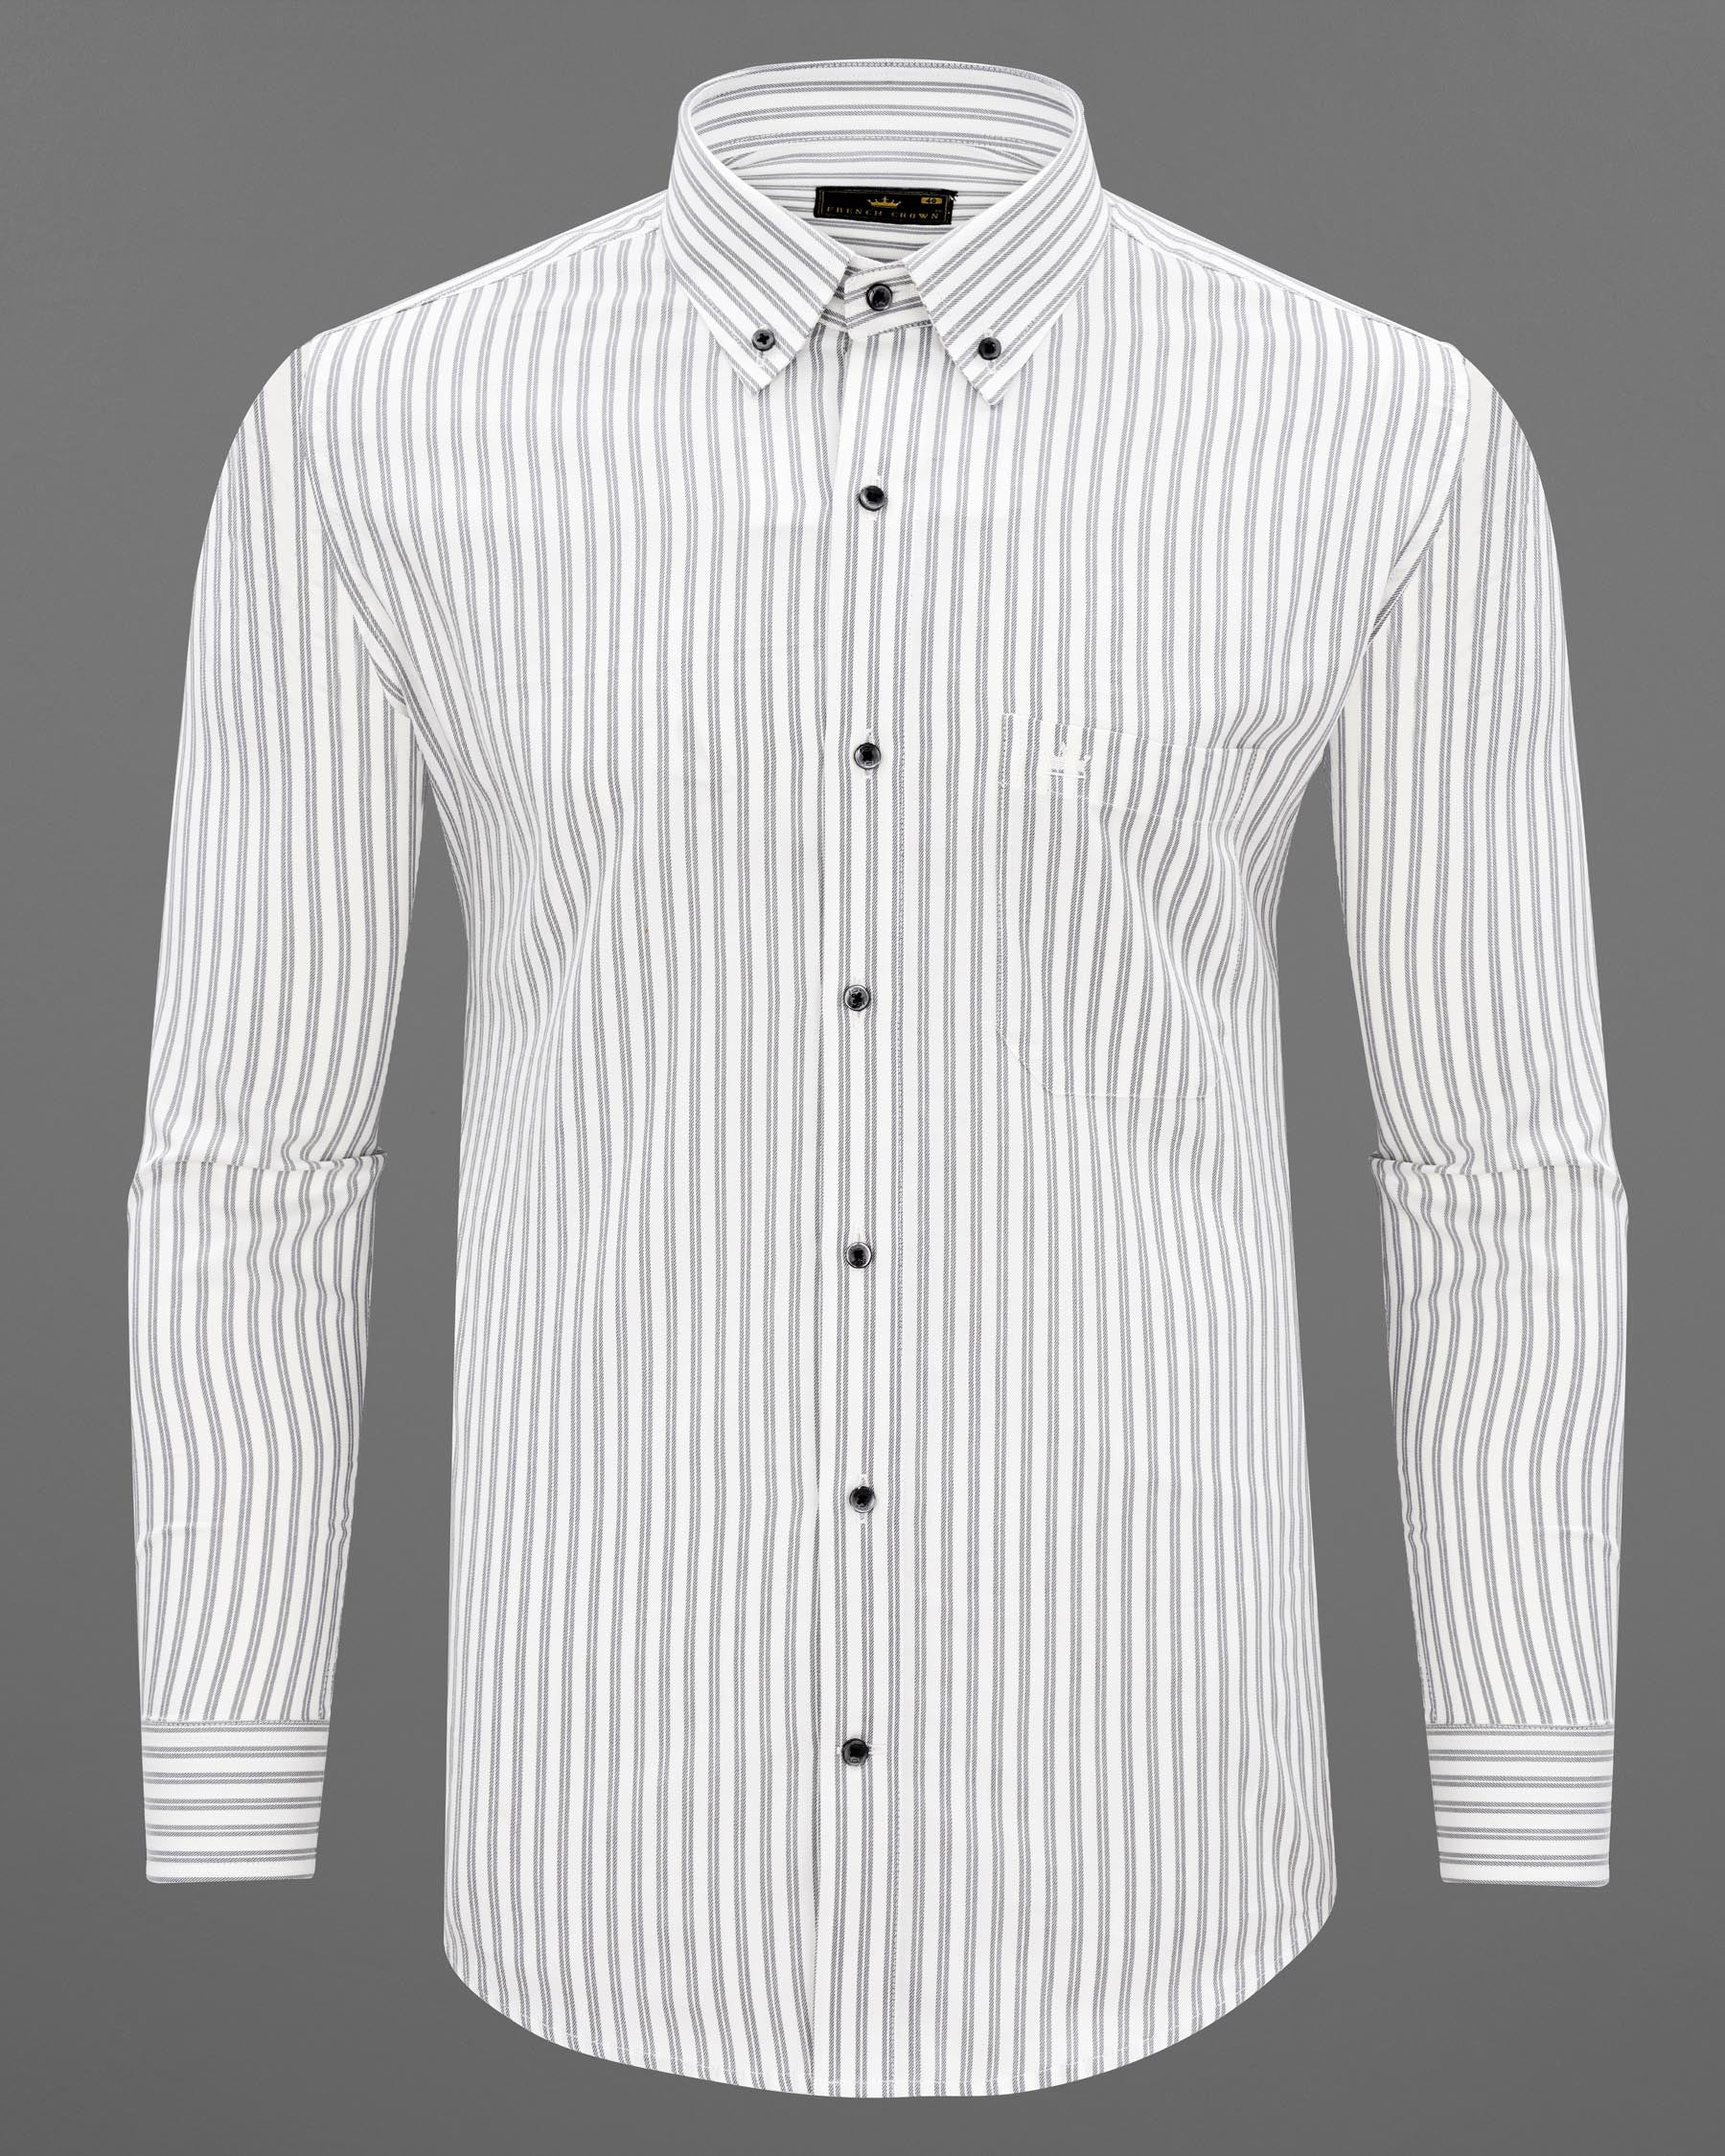 Off White with StarDust Gray Twill Striped Premium Cotton Shirt 7618-BD-BLK-38,7618-BD-BLK-38,7618-BD-BLK-39,7618-BD-BLK-39,7618-BD-BLK-40,7618-BD-BLK-40,7618-BD-BLK-42,7618-BD-BLK-42,7618-BD-BLK-44,7618-BD-BLK-44,7618-BD-BLK-46,7618-BD-BLK-46,7618-BD-BLK-48,7618-BD-BLK-48,7618-BD-BLK-50,7618-BD-BLK-50,7618-BD-BLK-52,7618-BD-BLK-52